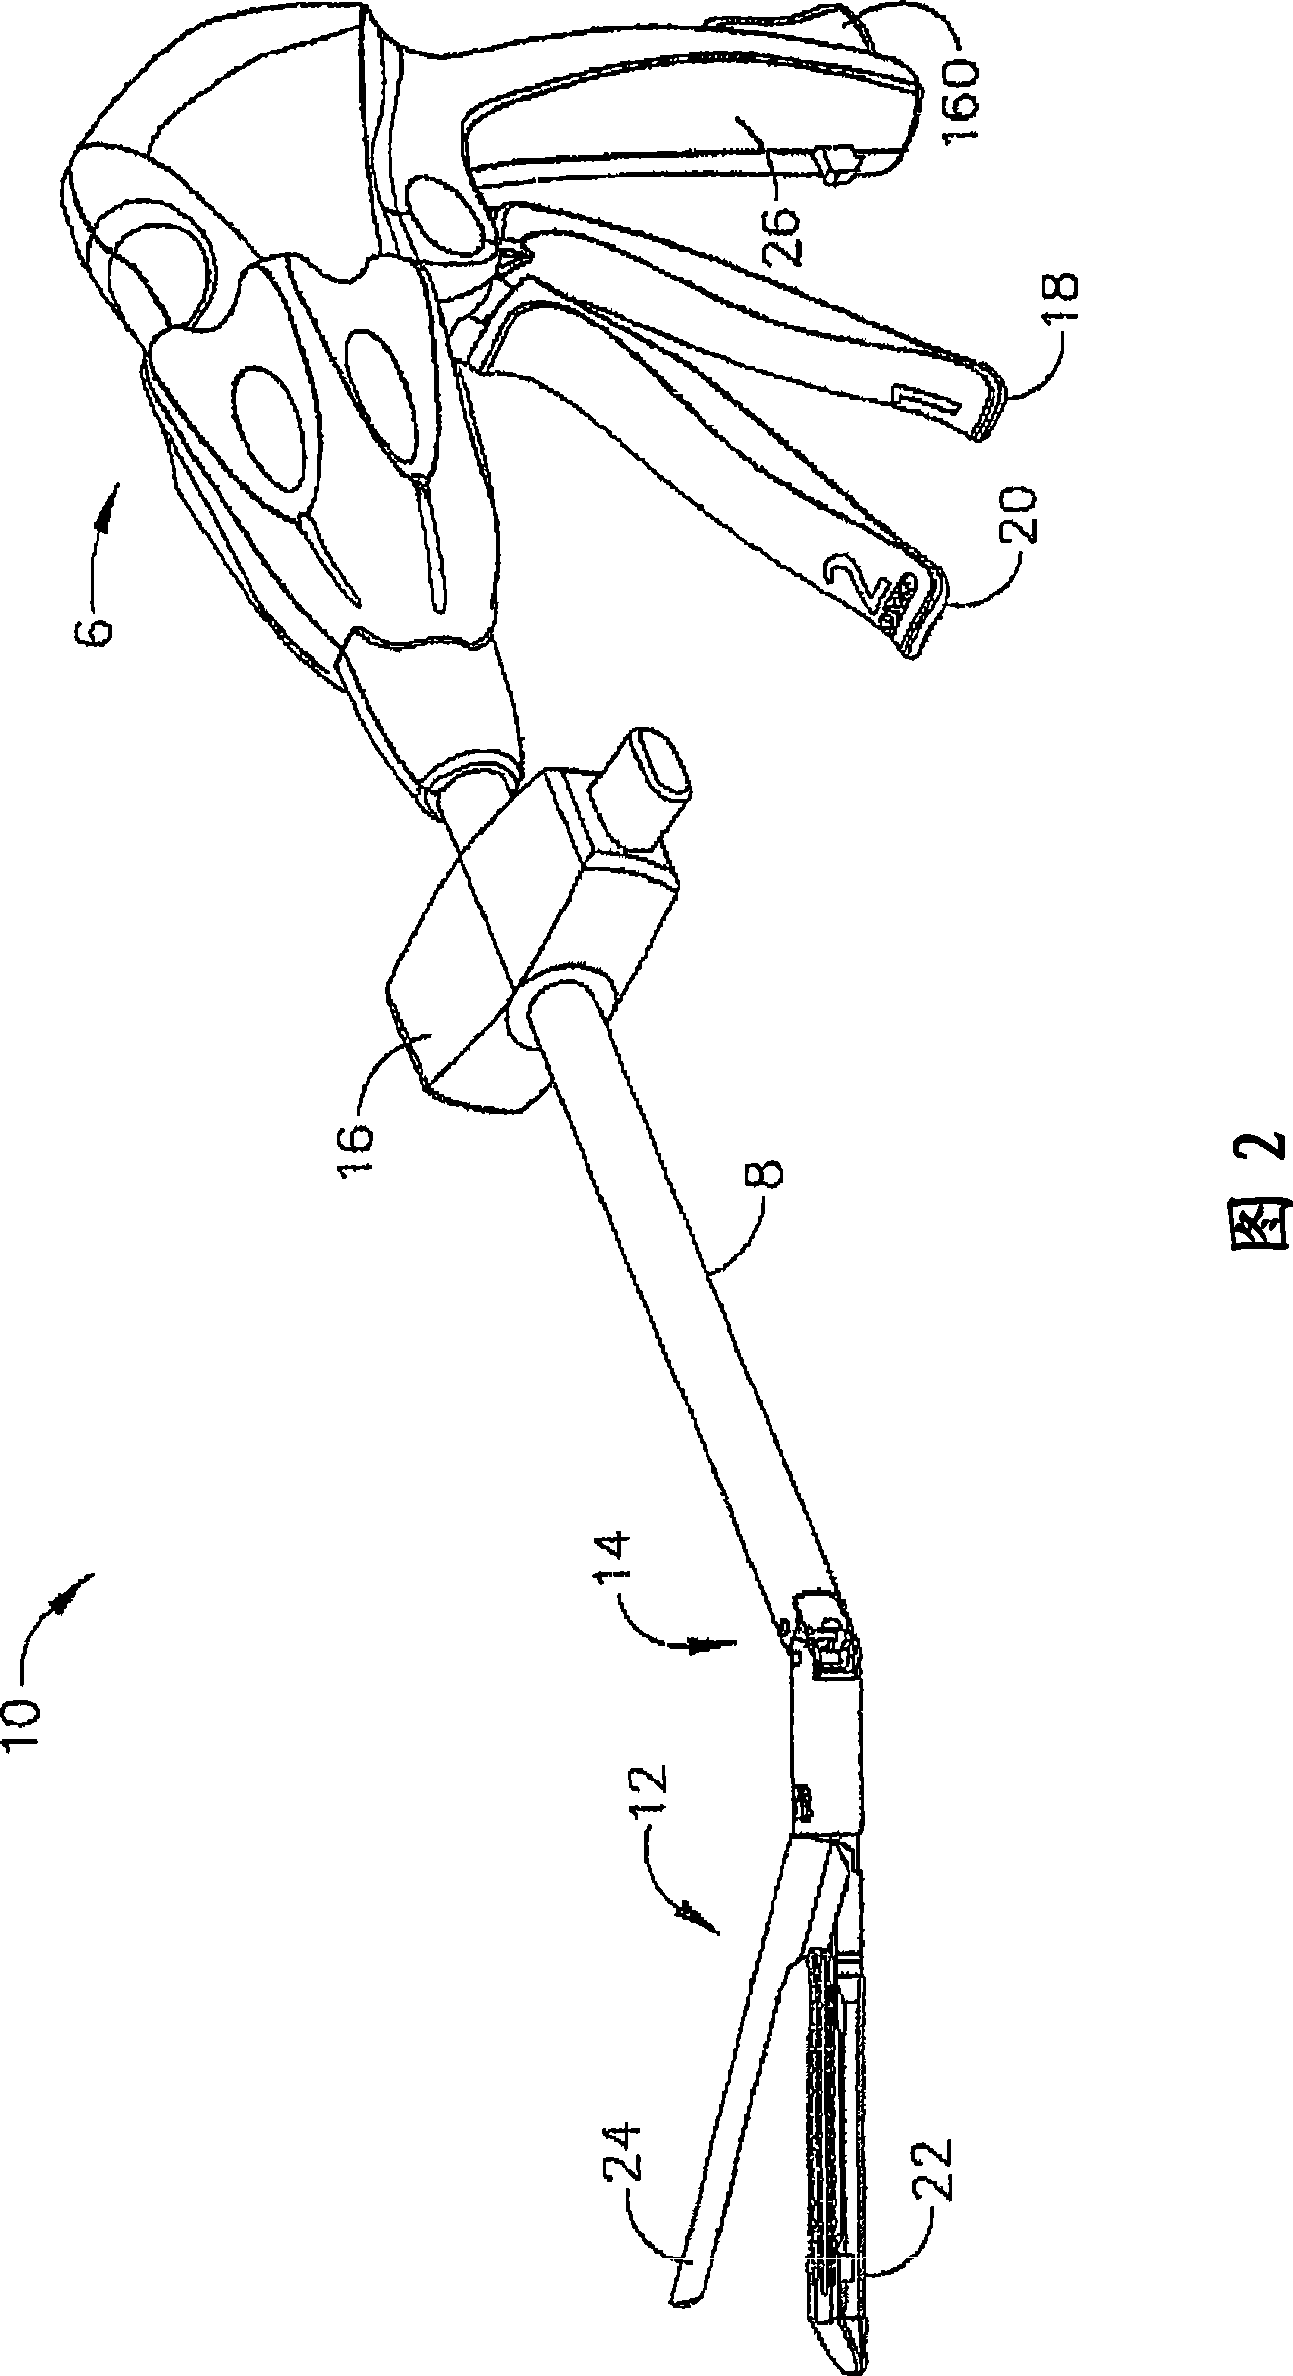 Surgical instrument with wireless communication between control unit and sensor transponders